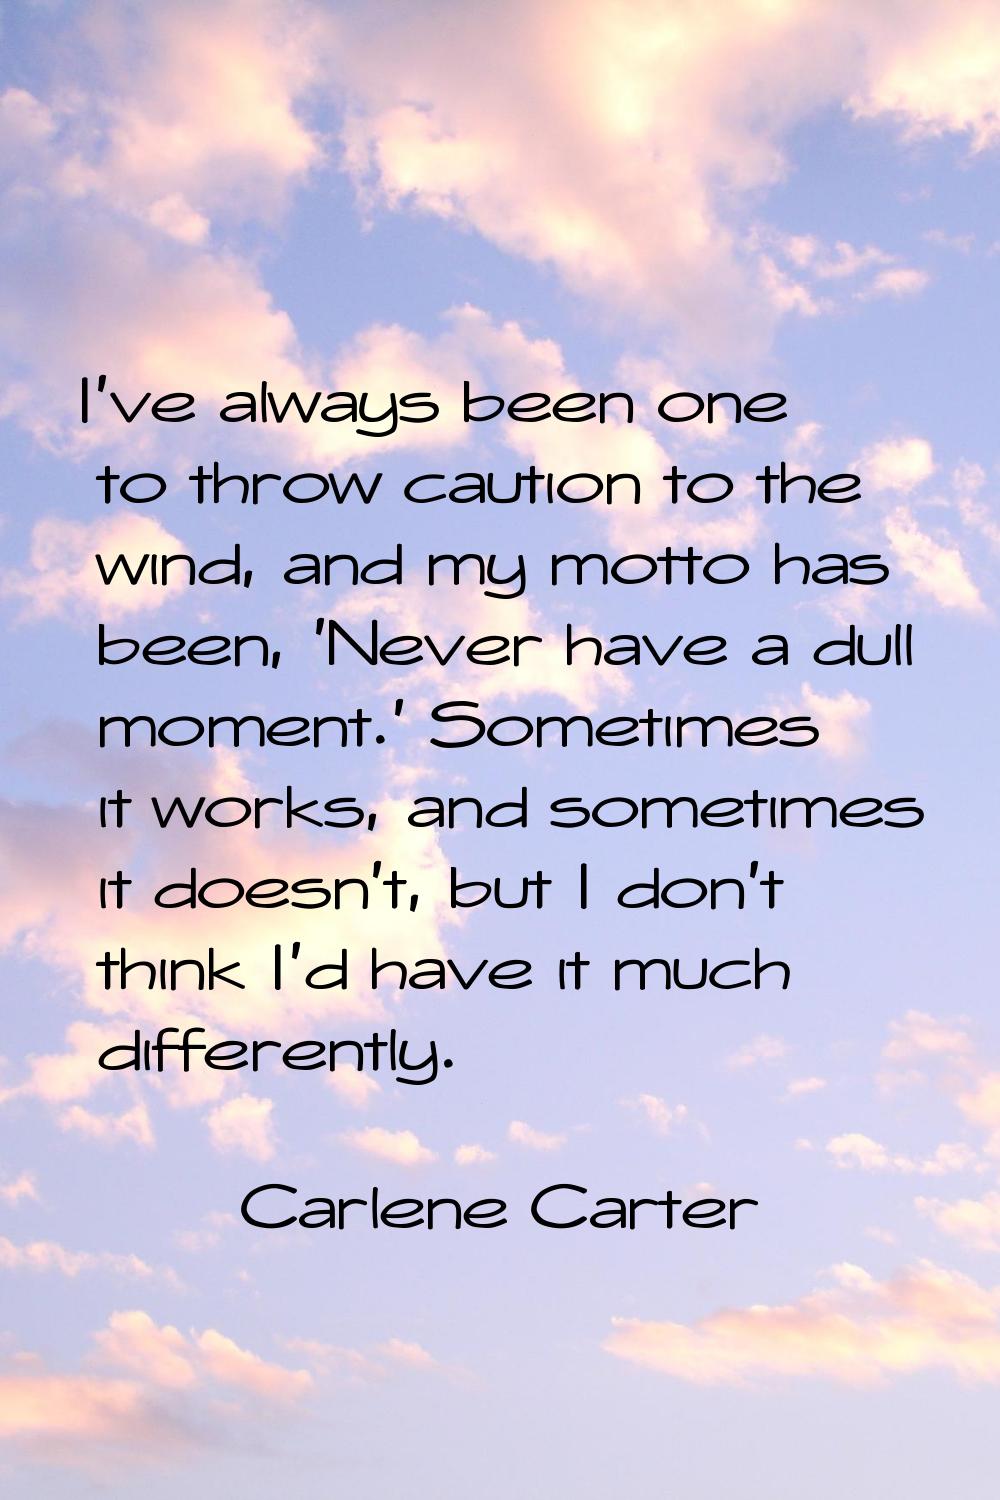 I've always been one to throw caution to the wind, and my motto has been, 'Never have a dull moment